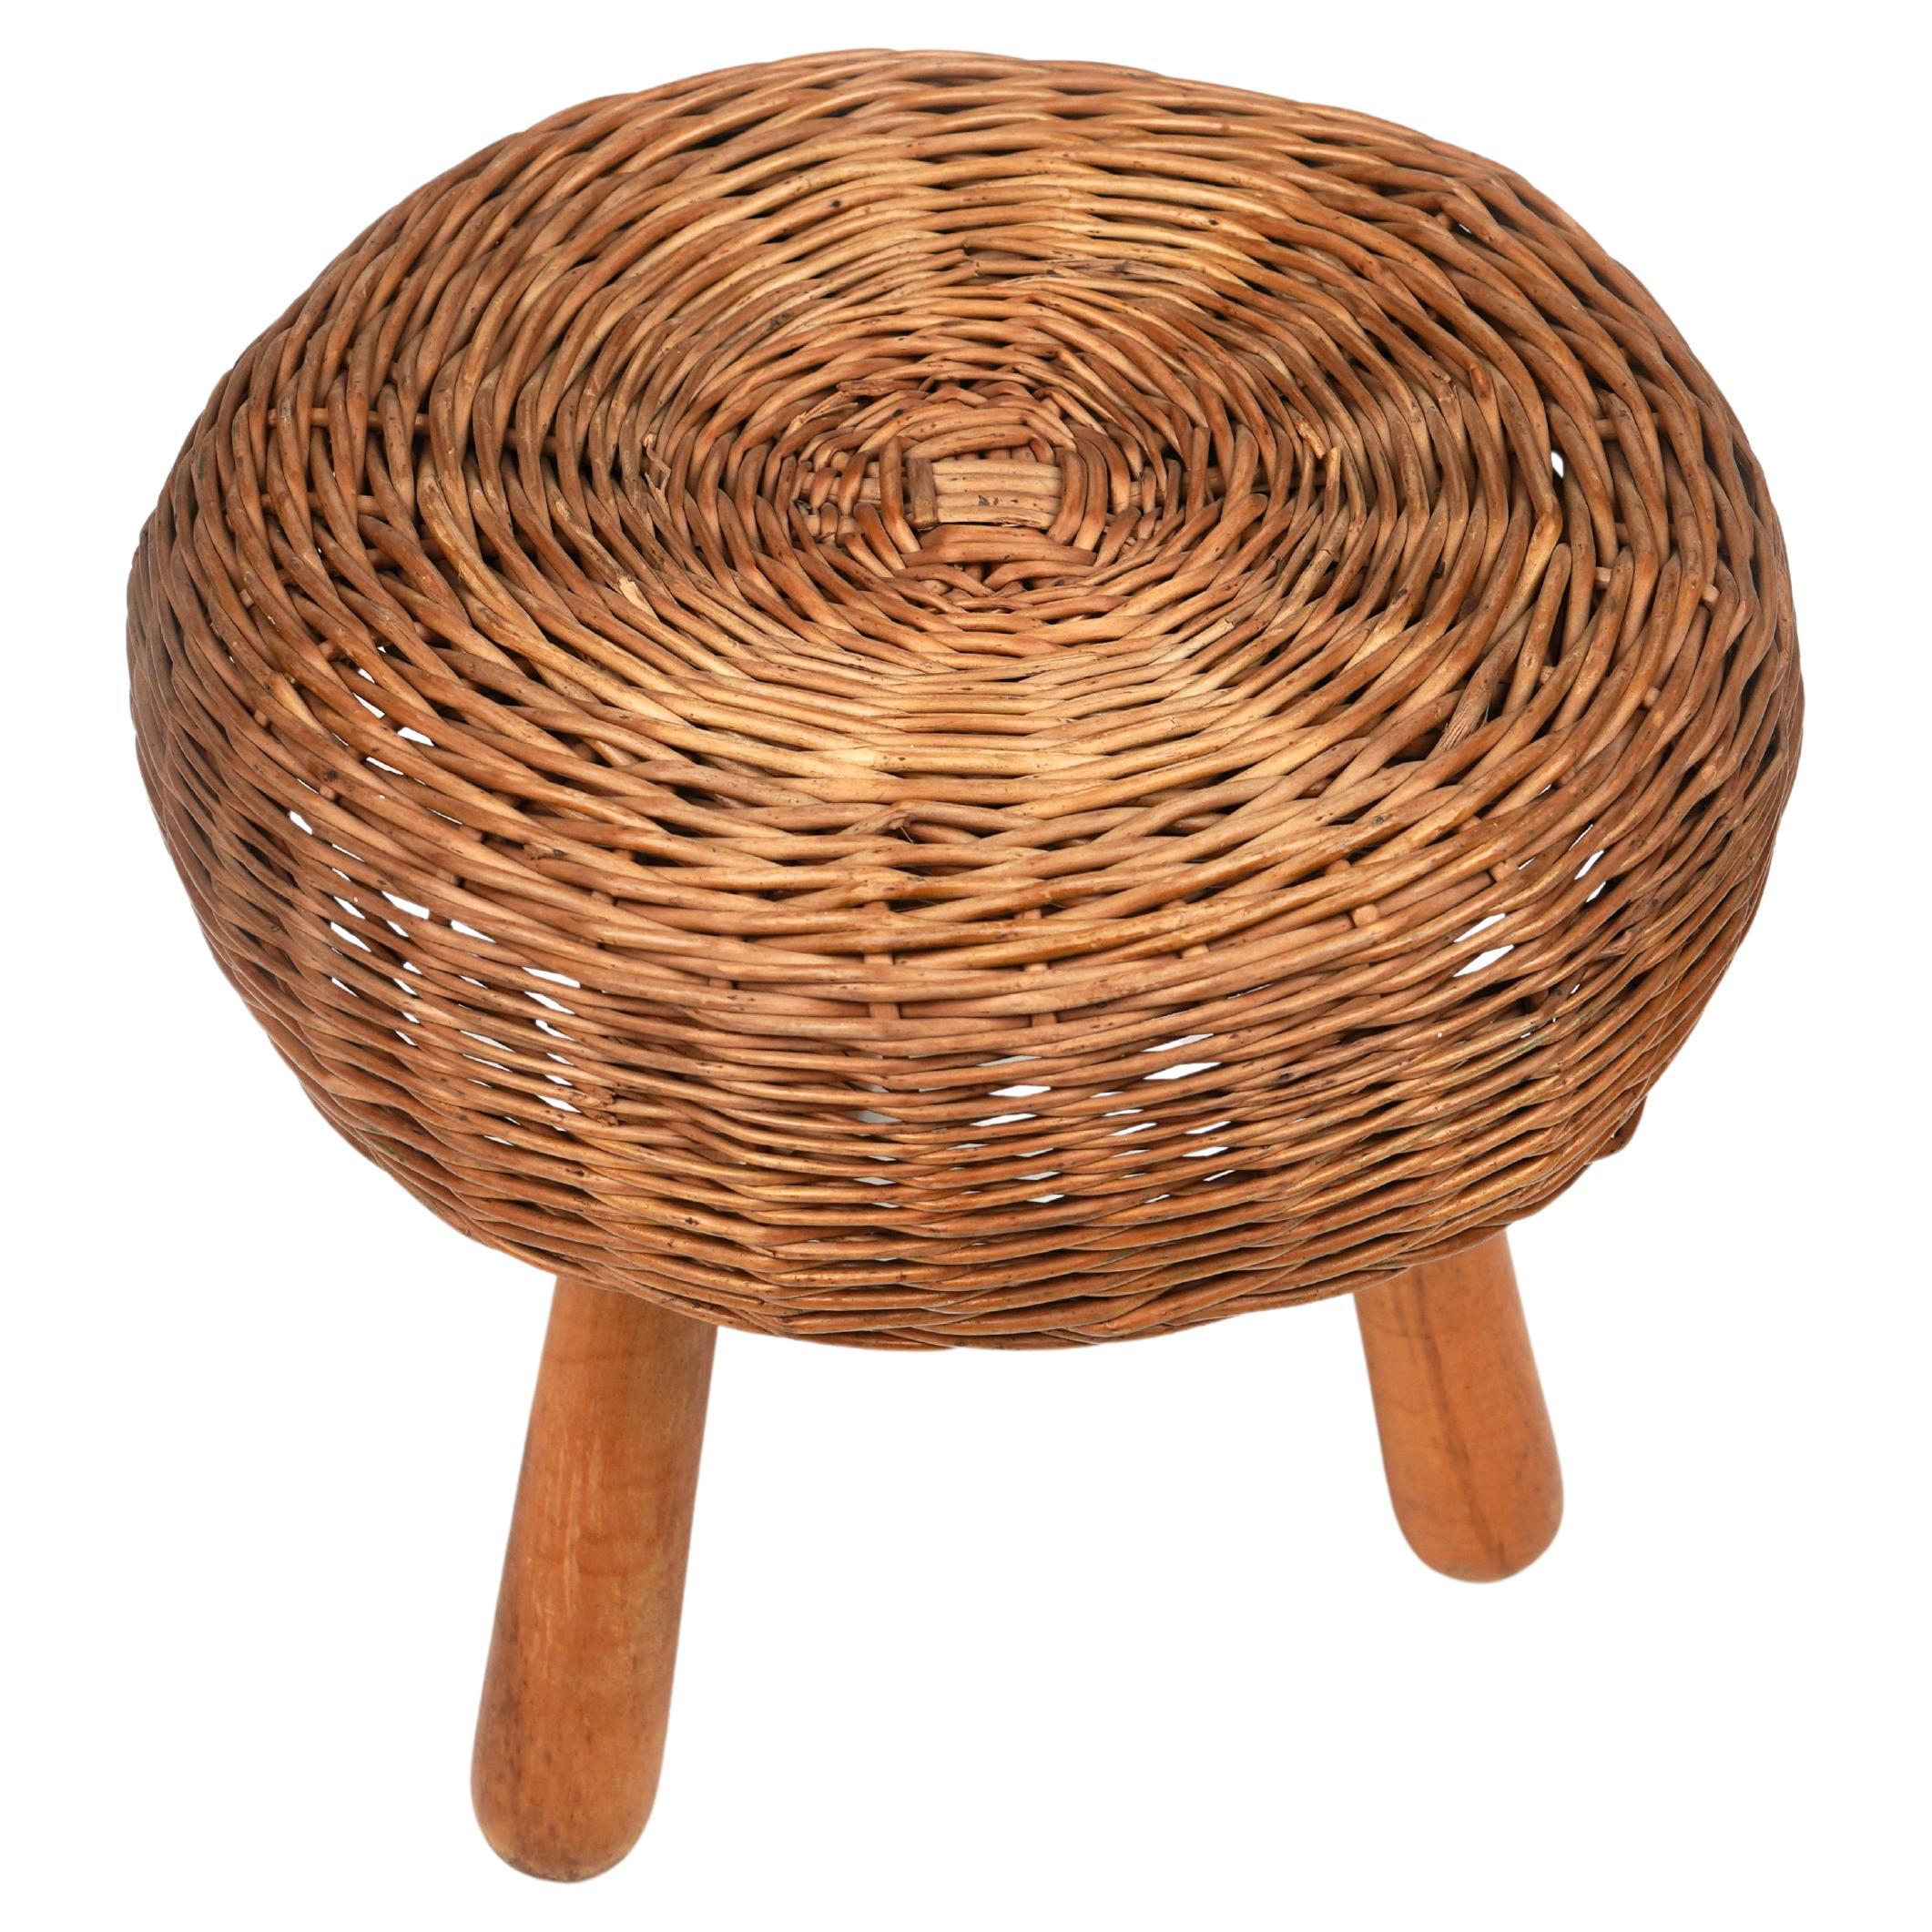 Central American Midcentury Wicker and Wood Tripod Stool by Tony Paul, United States, 1950s For Sale